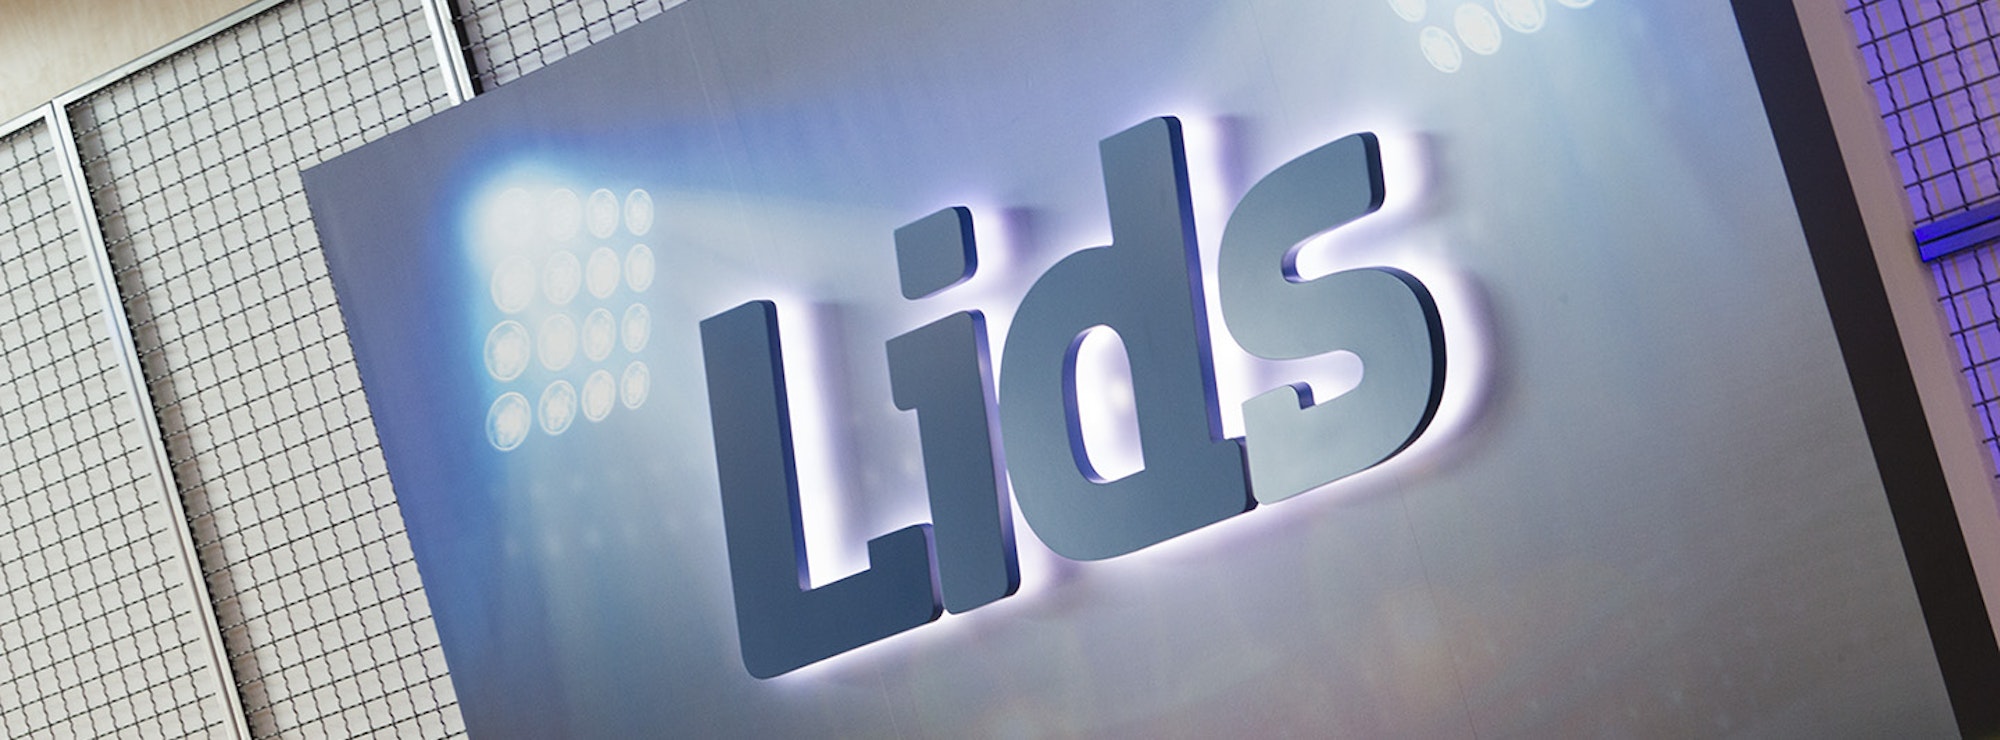 Lids lobby graphic sign